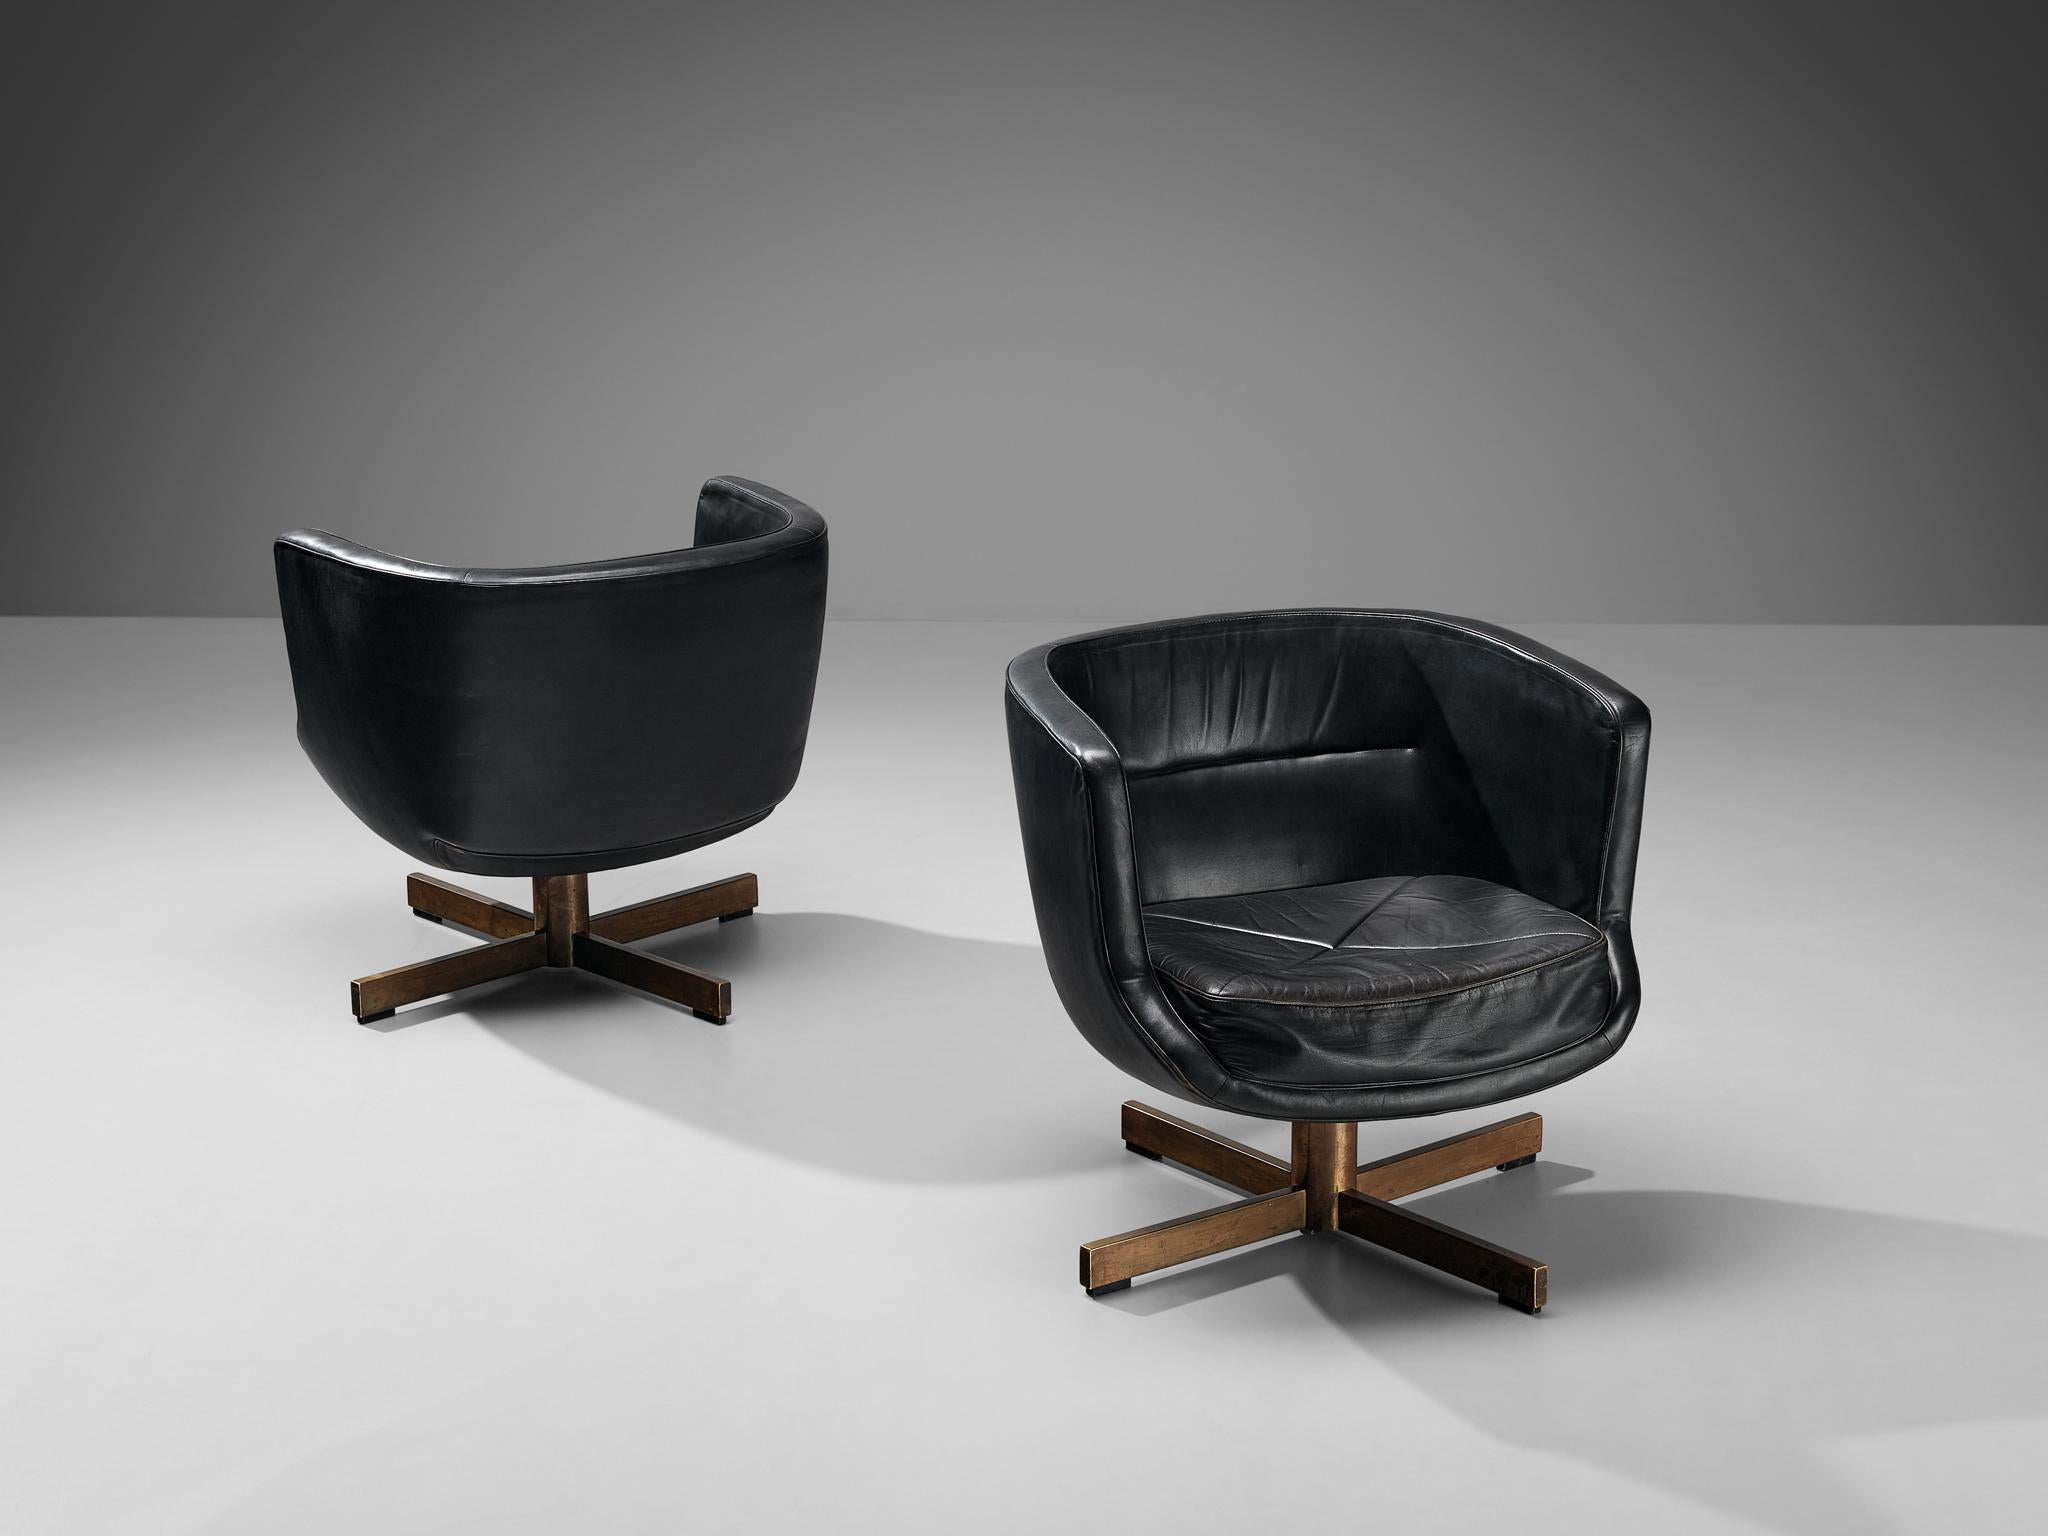 Antti Nurmesniemi, custom made pair of armchairs, black leather, brass-plated steel, Finland, 1958

These swivel chairs, exemplifying the Mid-Century Modern style, were meticulously crafted by the esteemed Finnish designer Antti Nurmesniemi